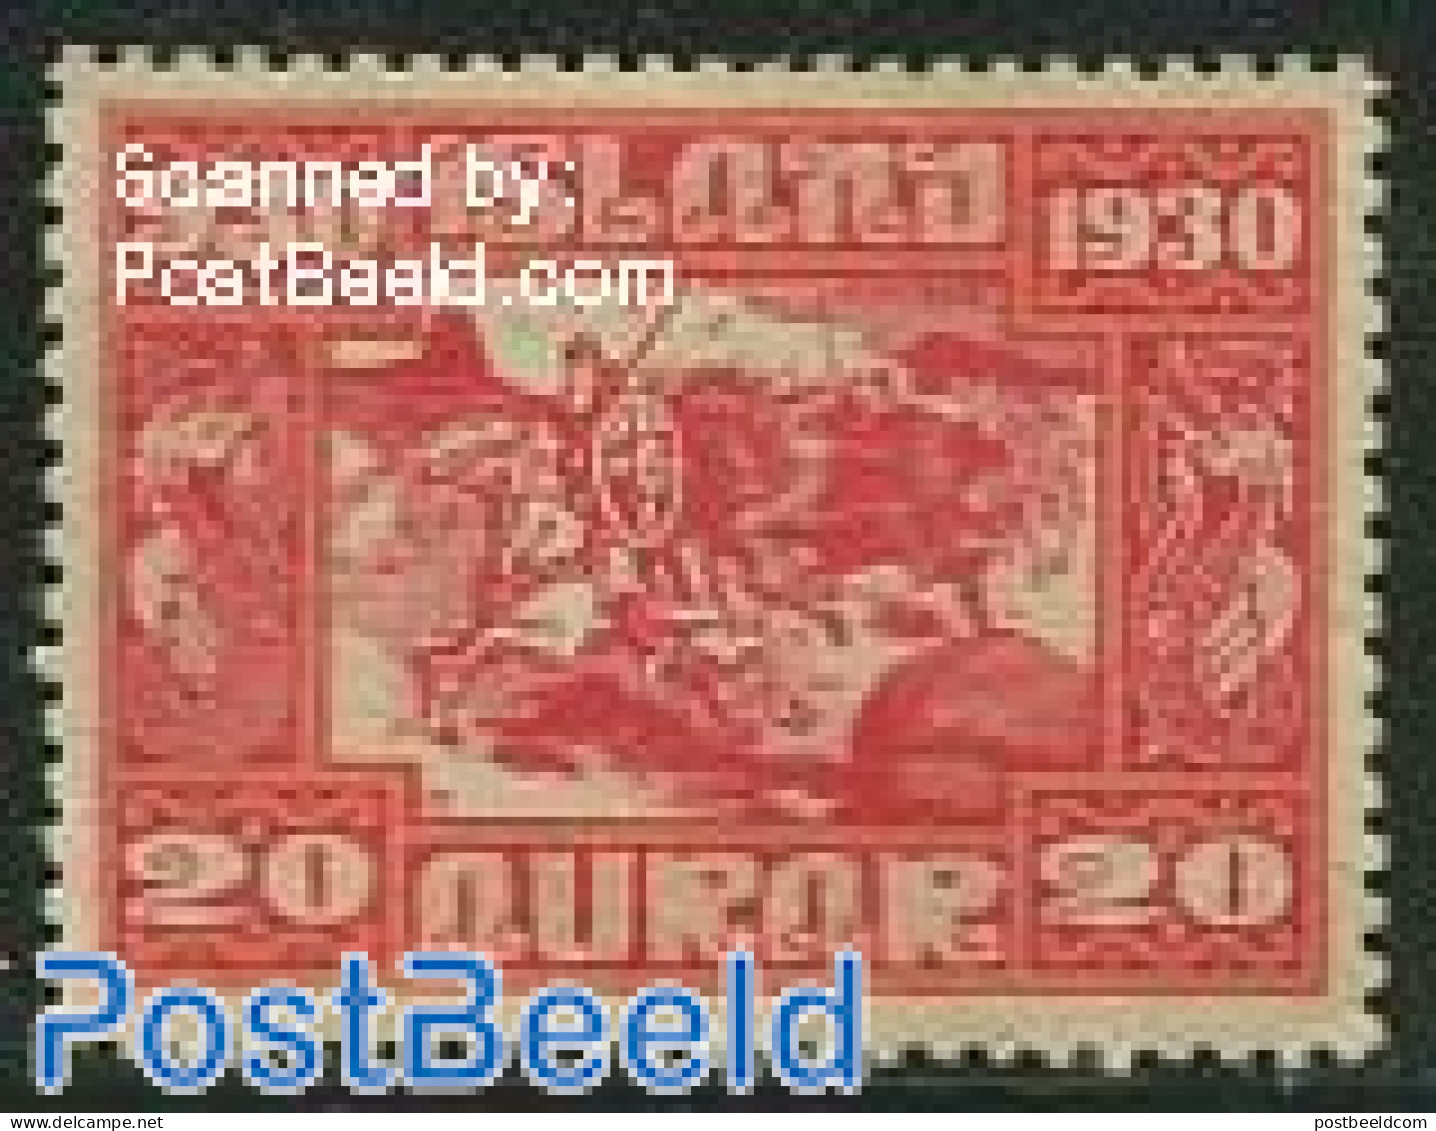 Iceland 1930 20A, Stamp Out Of Set, Unused (hinged), Nature - Horses - Ungebraucht